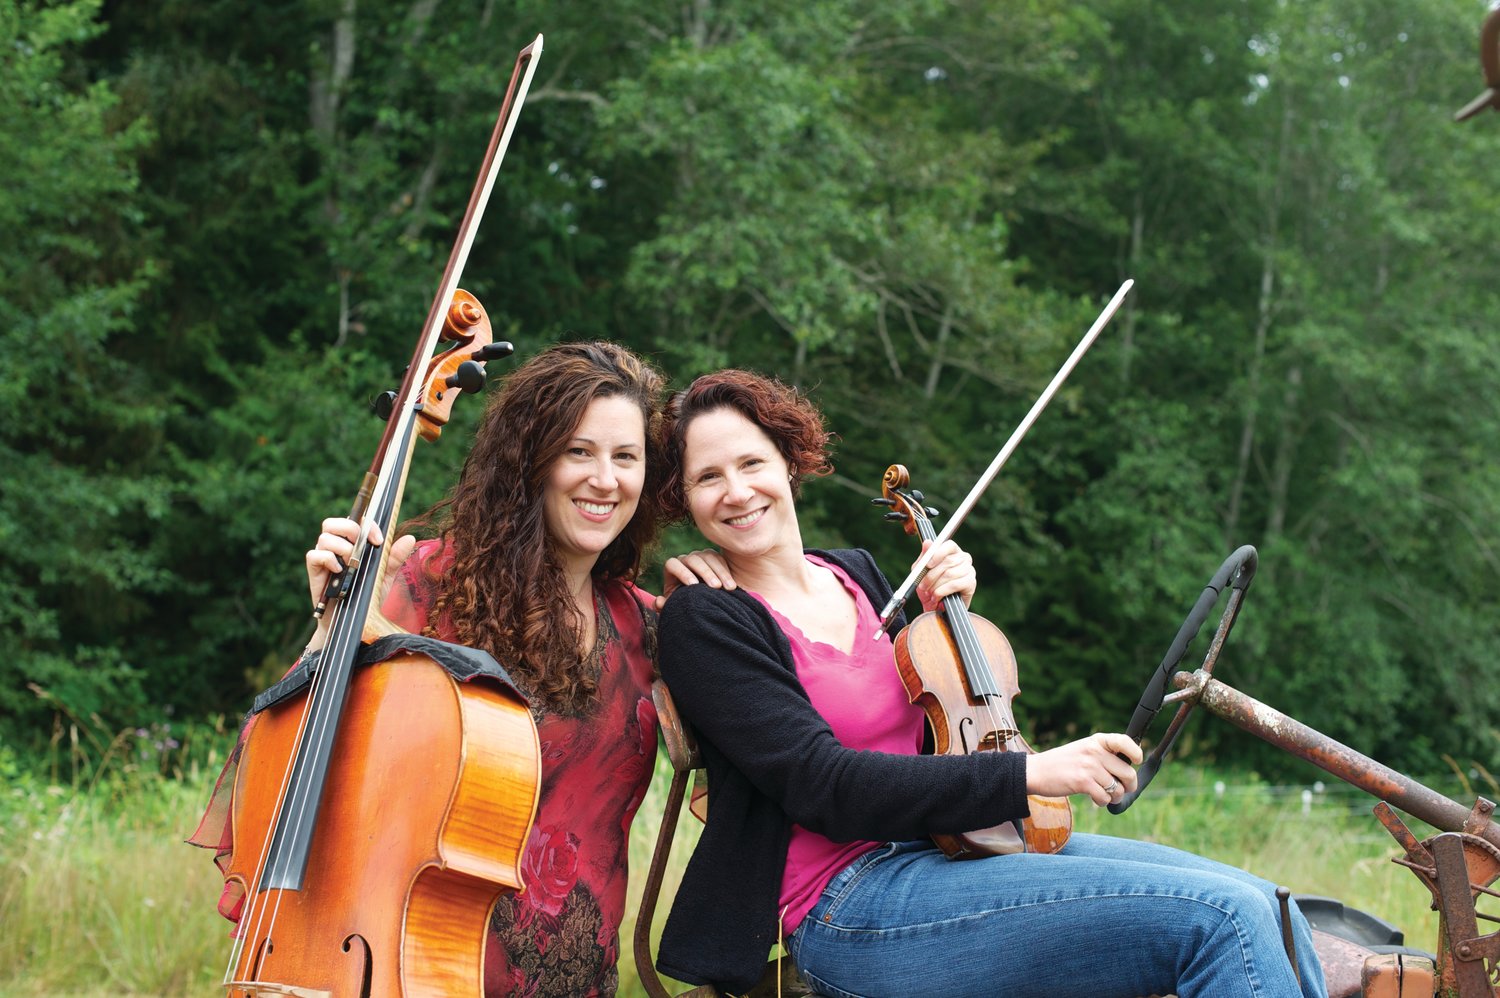 The Barston sisters are members of the group, Trio Hava, performing at the next Concerts in the Barn.